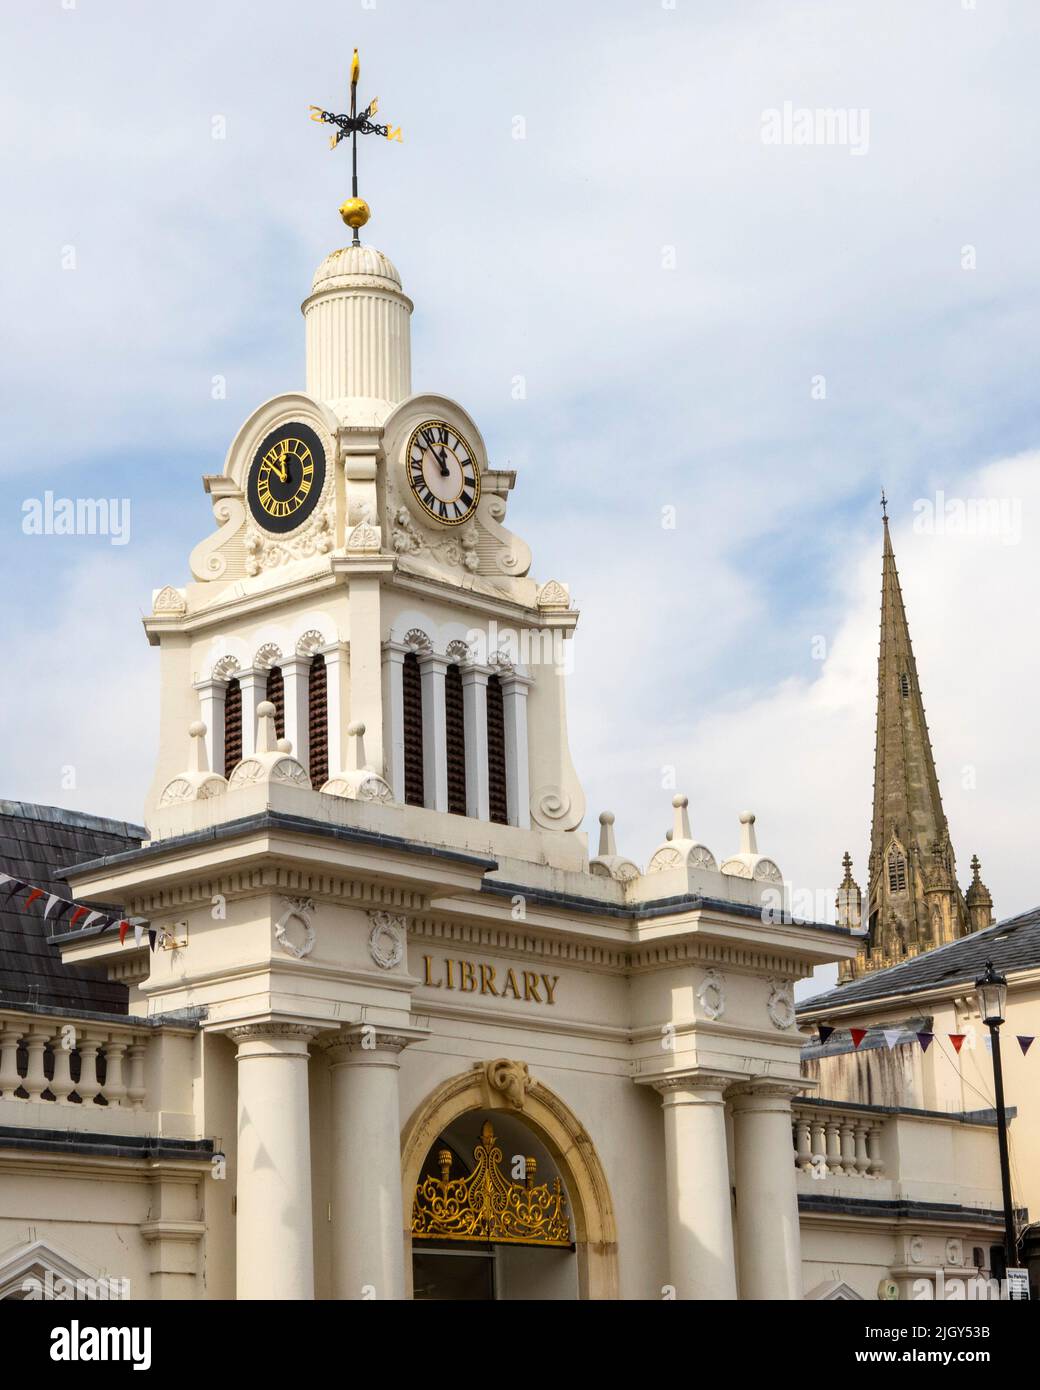 Essex, UK - September 6th 2021: Library building and the spire of St. Marys Church in the historic market town of Saffron Walden in Essex, UK. Stock Photo